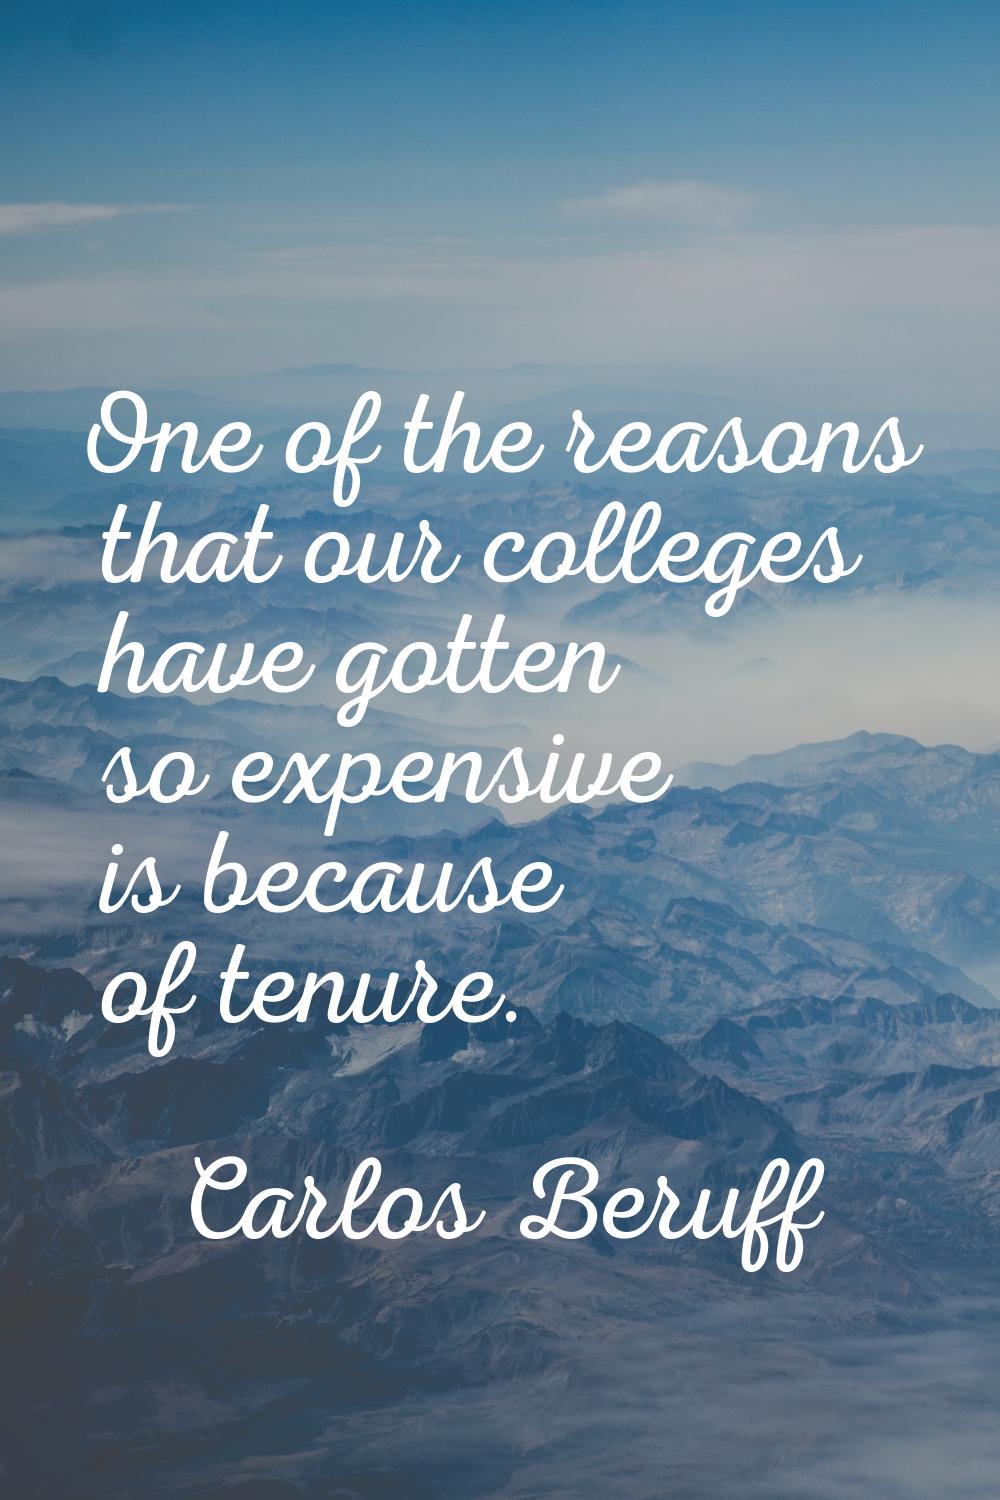 One of the reasons that our colleges have gotten so expensive is because of tenure.